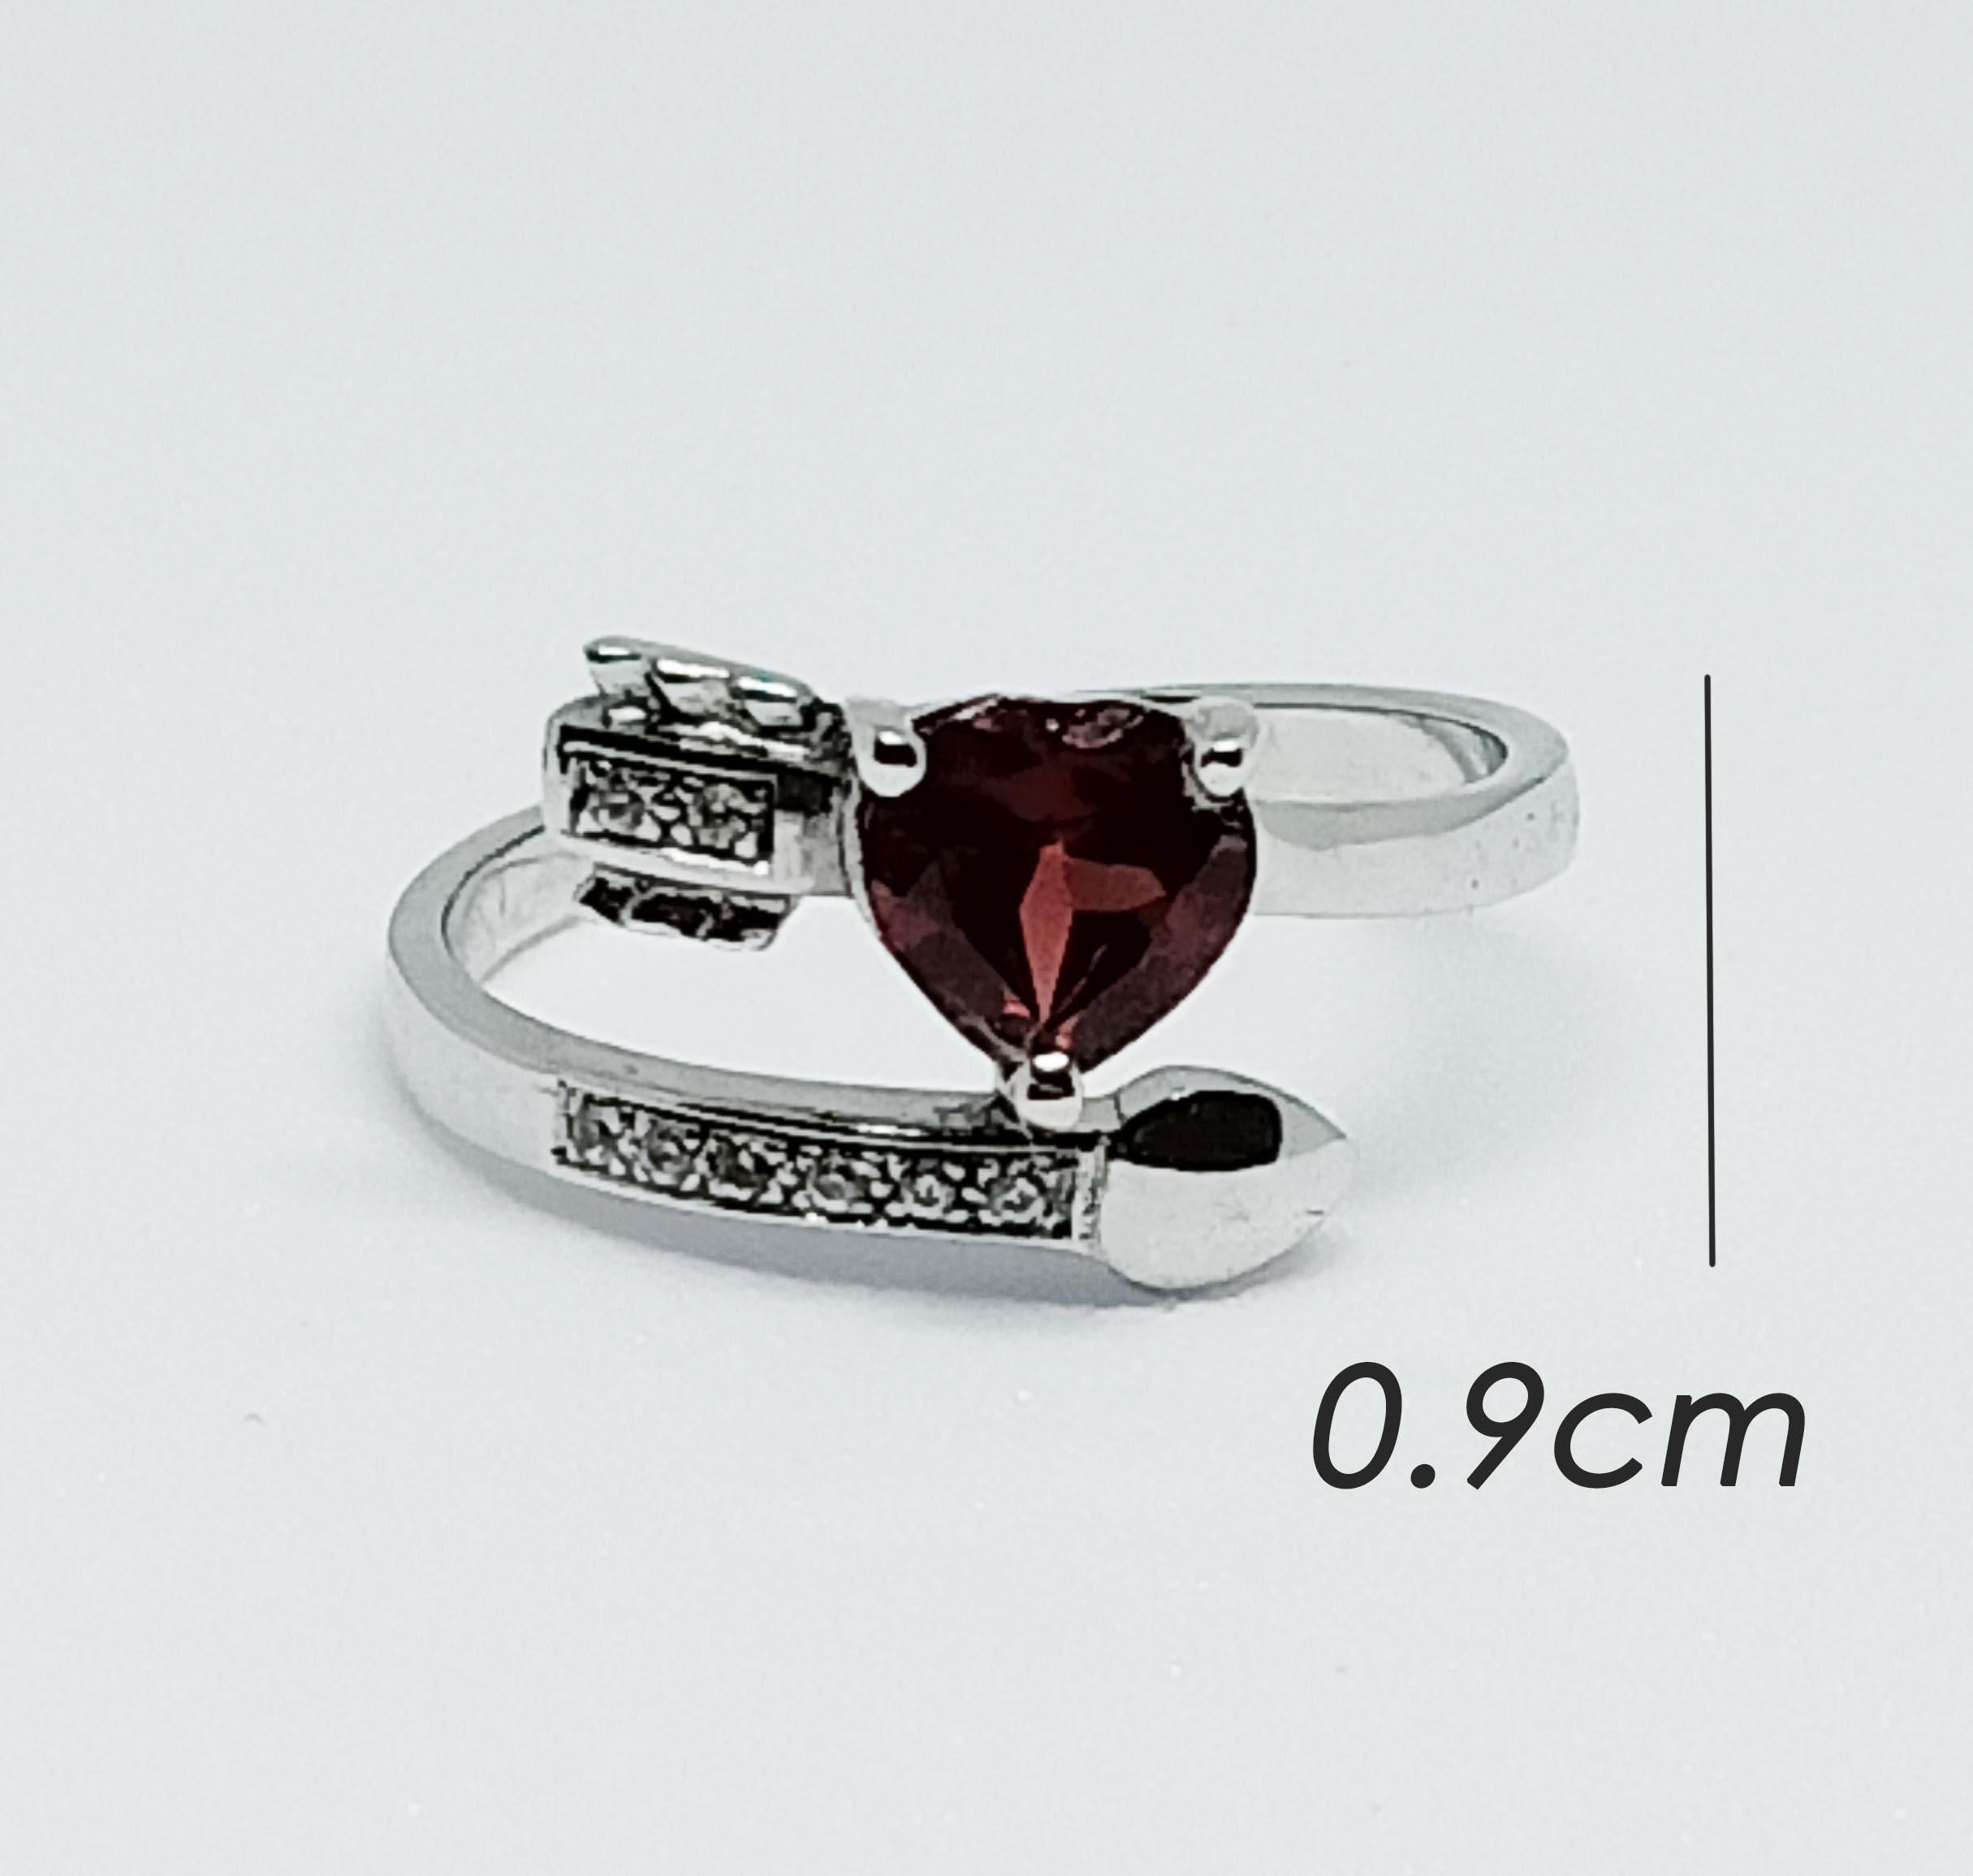 Heart garnet6x6mm. 1 pc.
White zircon 1.0 mm.8 pcs.
Over sterling silver in white gold plated.
Size 6.5us.

search (storefront, seller ) Ornamento jewellery